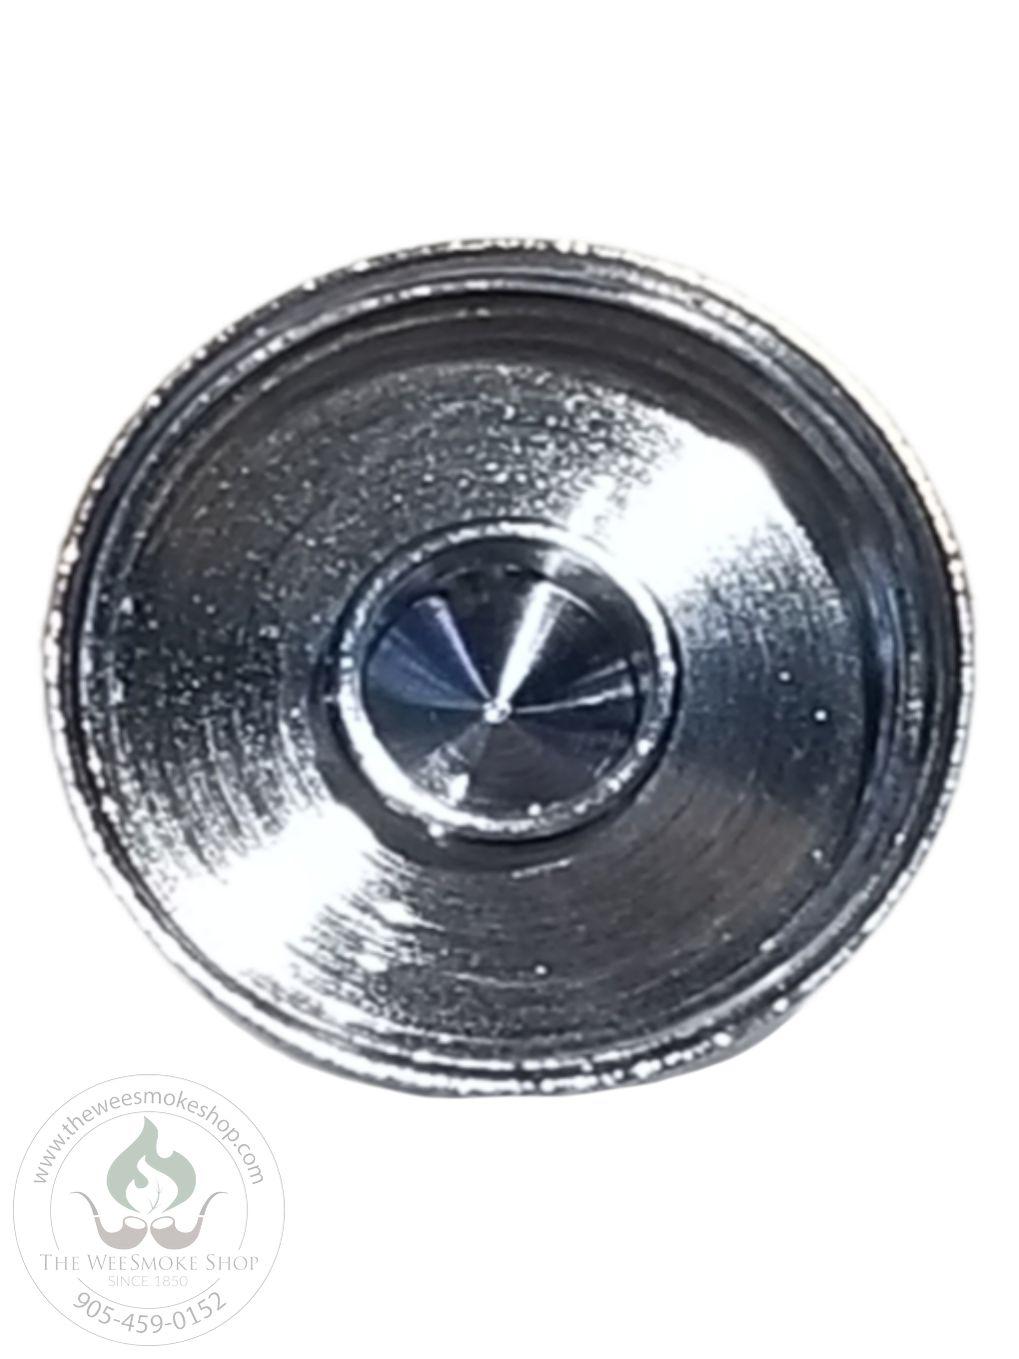 Evolve Plus Wax Replacement Coil Cap-Vape Accessories-The Wee Smoke Shop